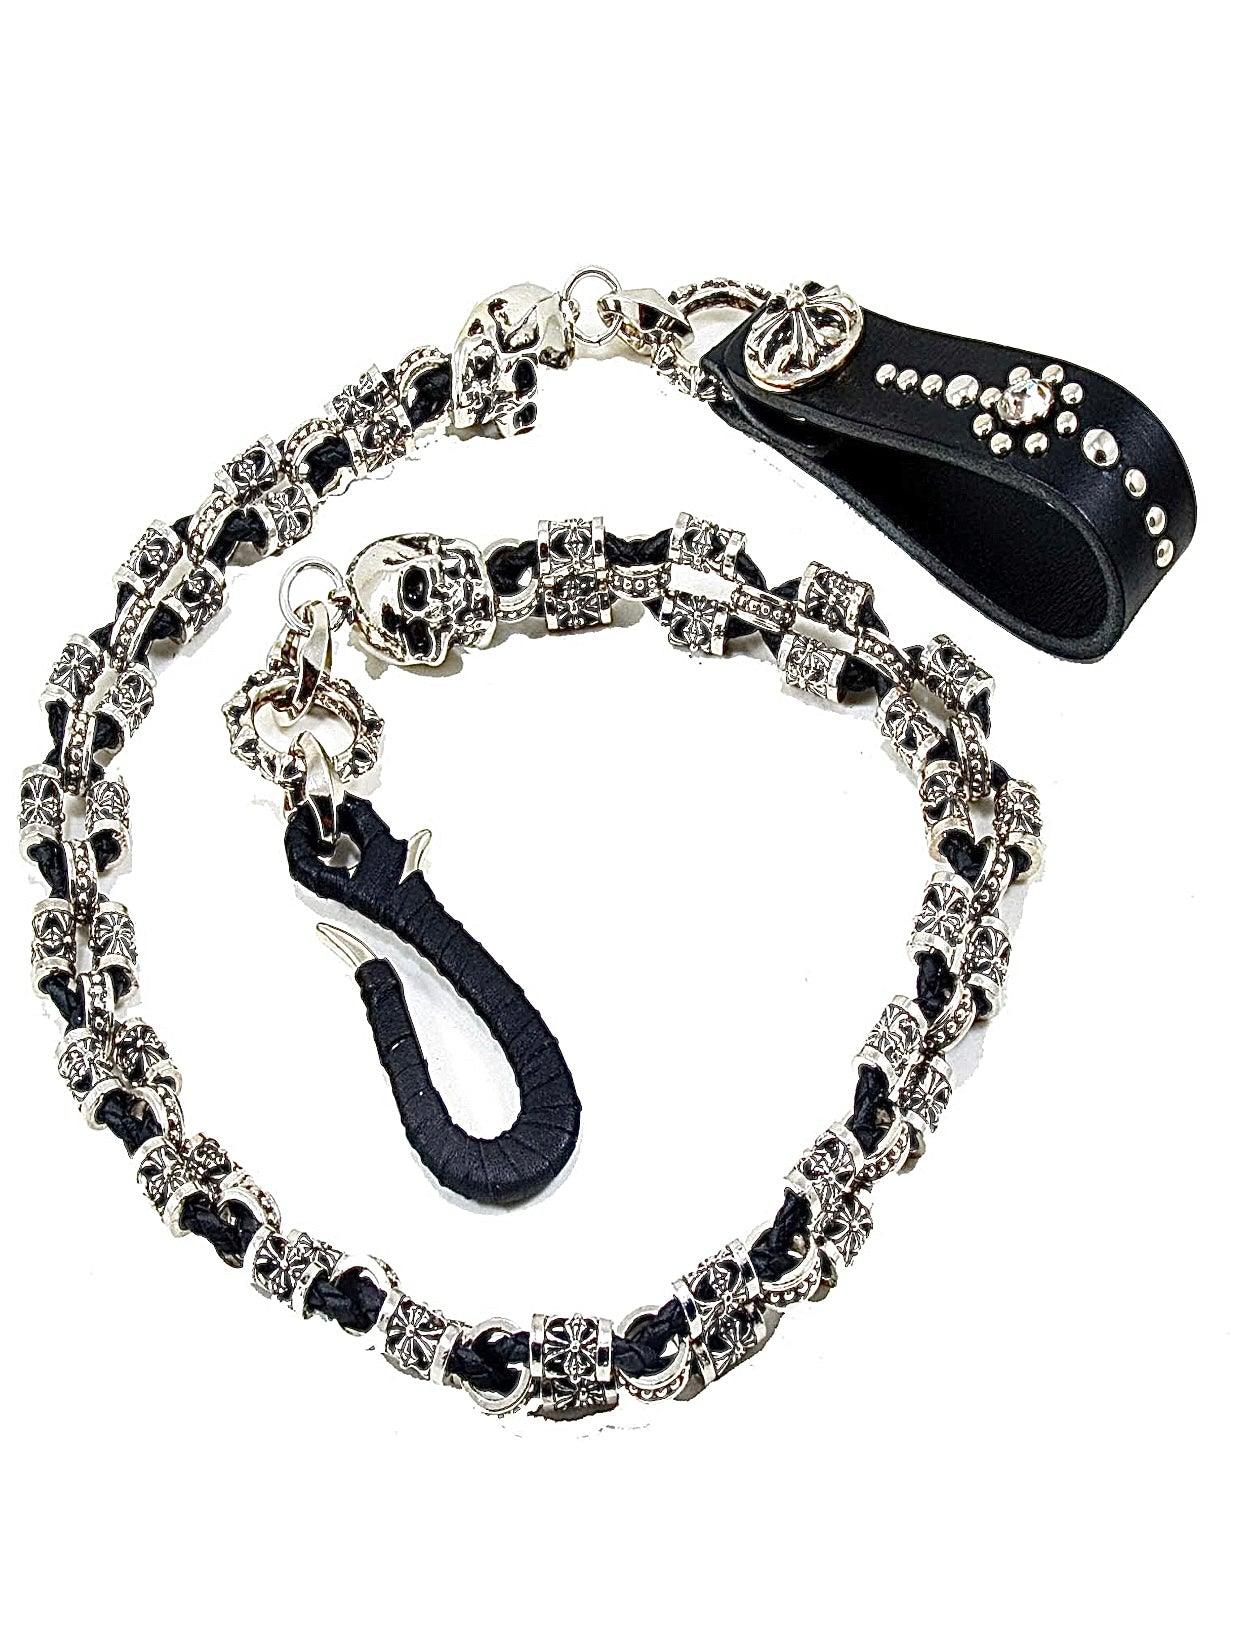 HANDMADE Melted Skull Wallet Chain - Wicked Steel